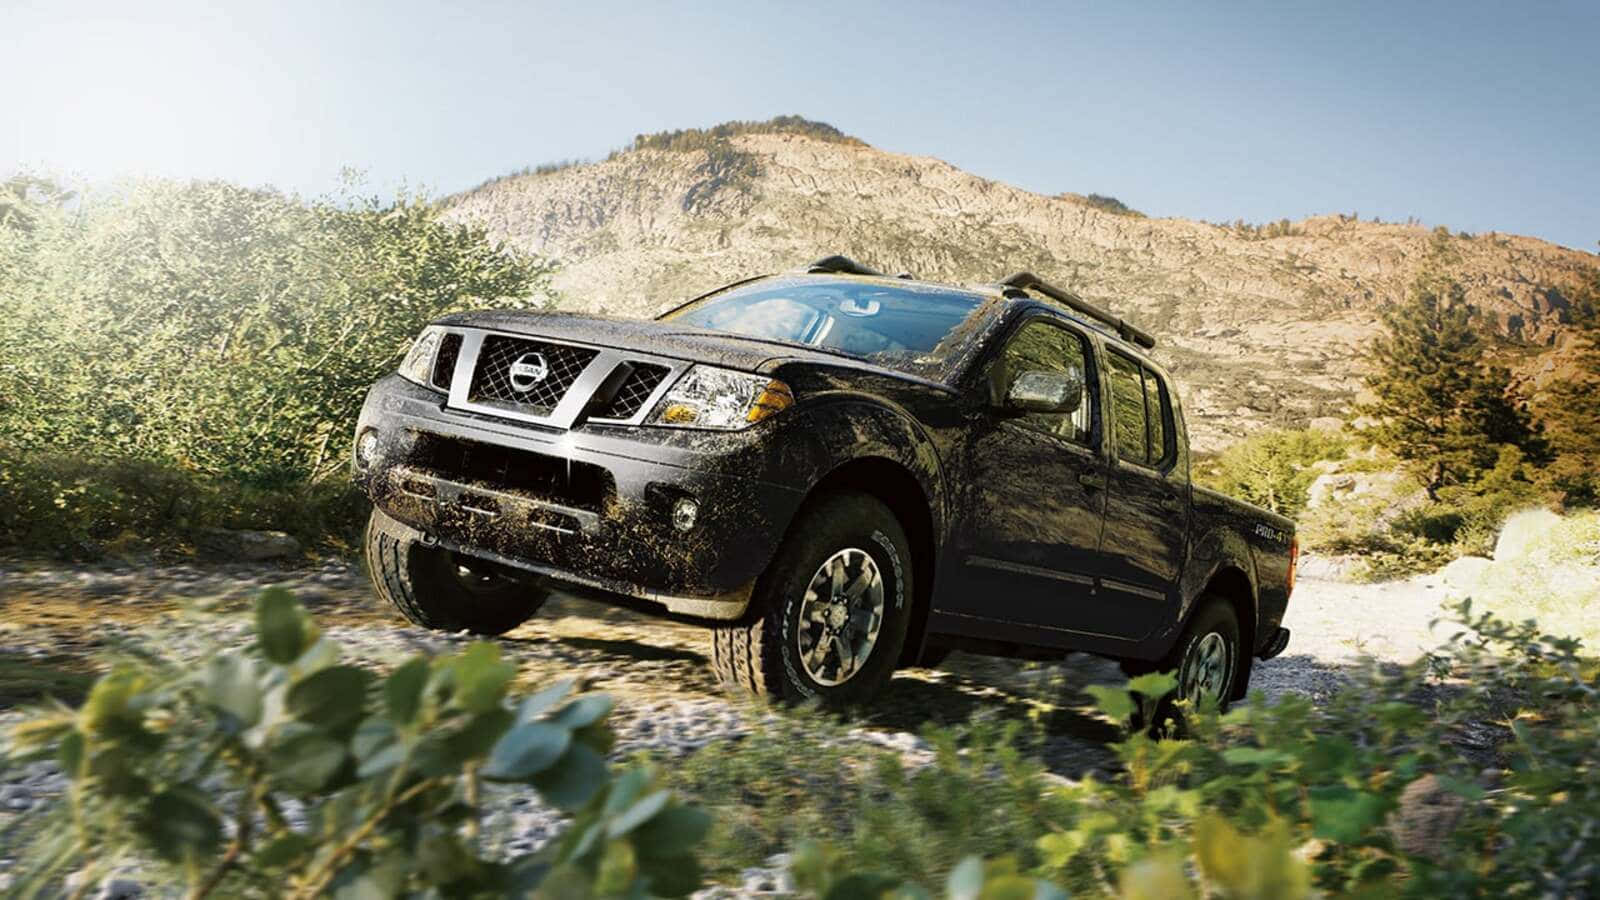 A Nissan Frontier Showcasing Its Robustness In An Off-road Journey. Wallpaper